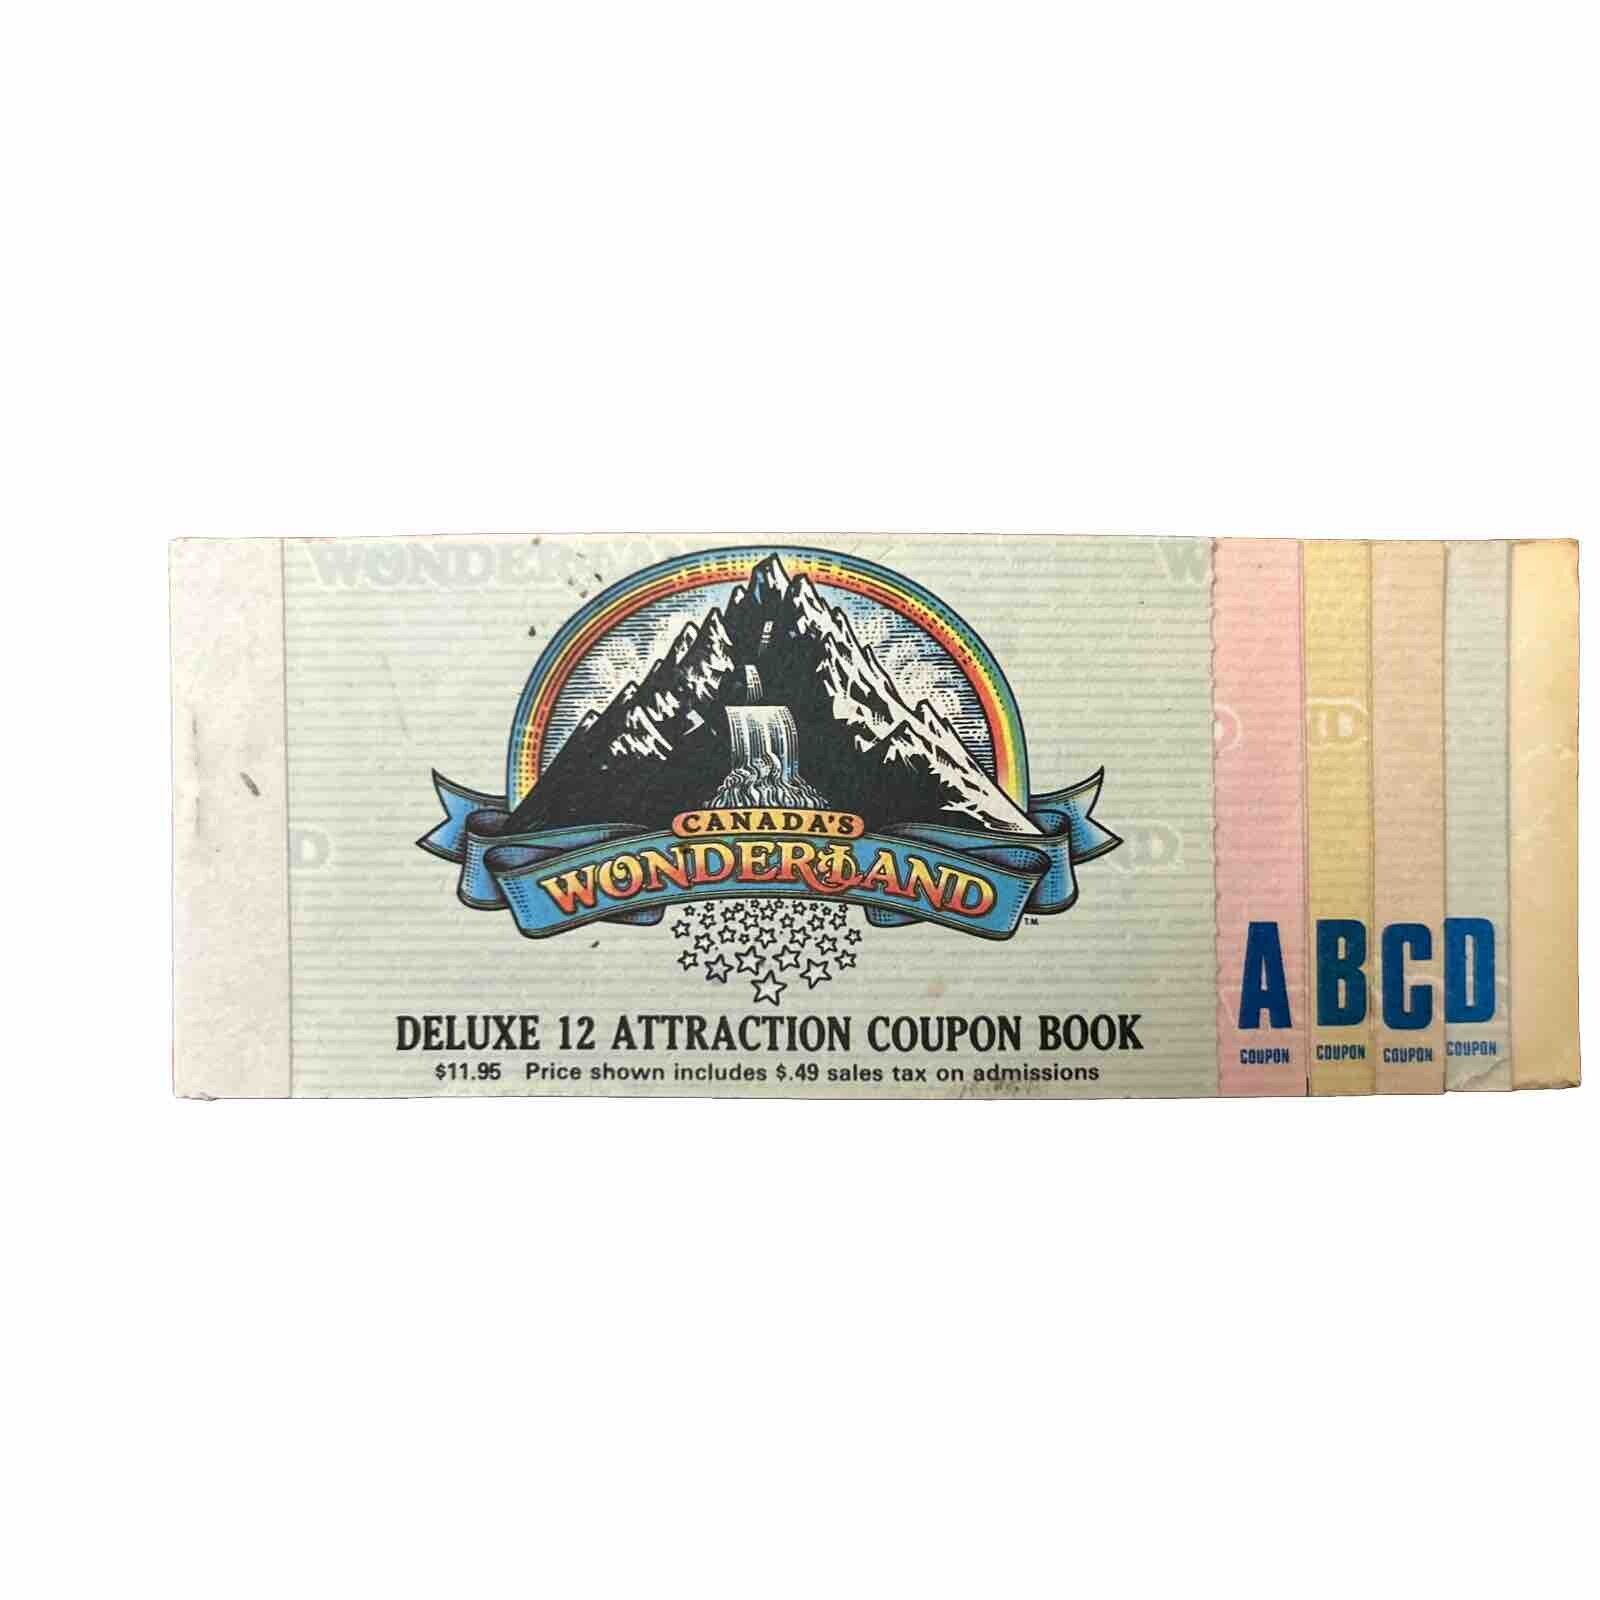 CANADA’s WONDERLAND 12 DELUXE ATTRACTION COUPON BOOK TICKETS A B C D 1980’s